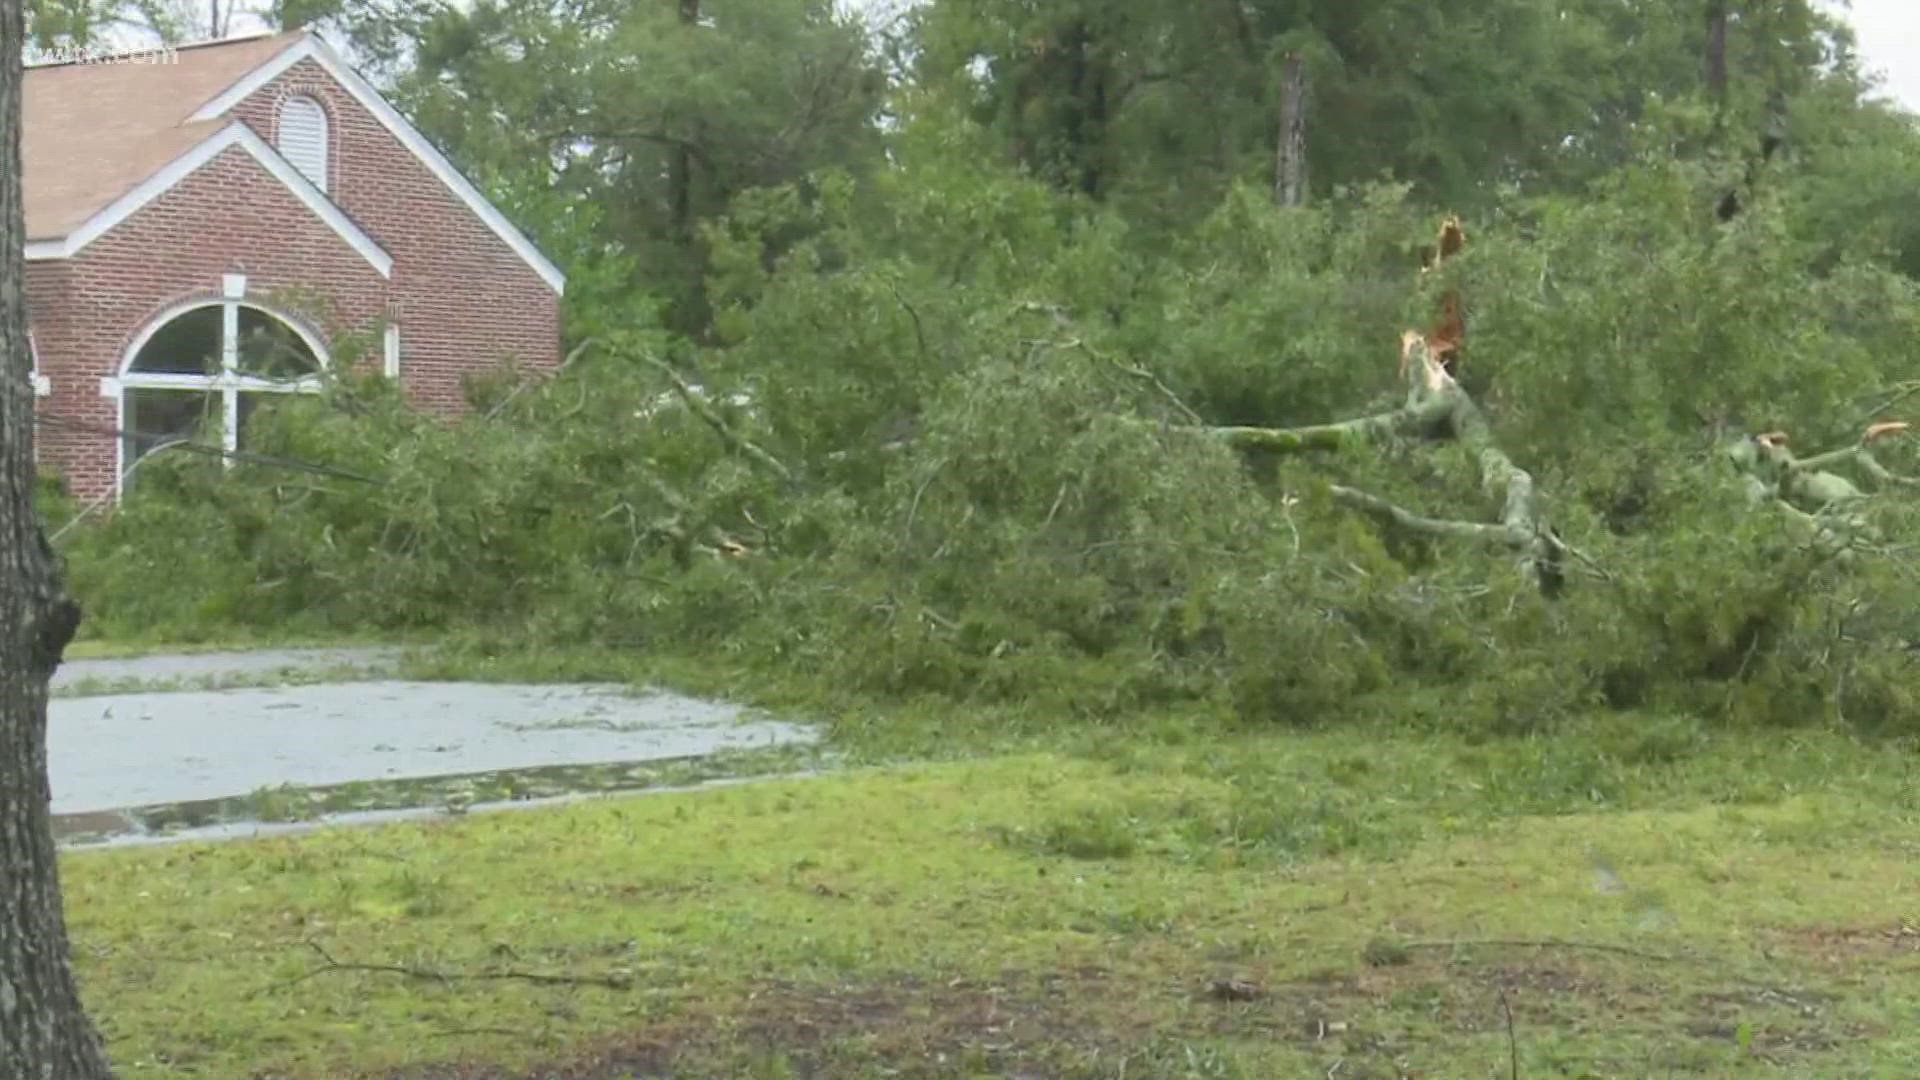 The Town of Holly Hill was where most of the damage in the eastern part of Orangeburg county.